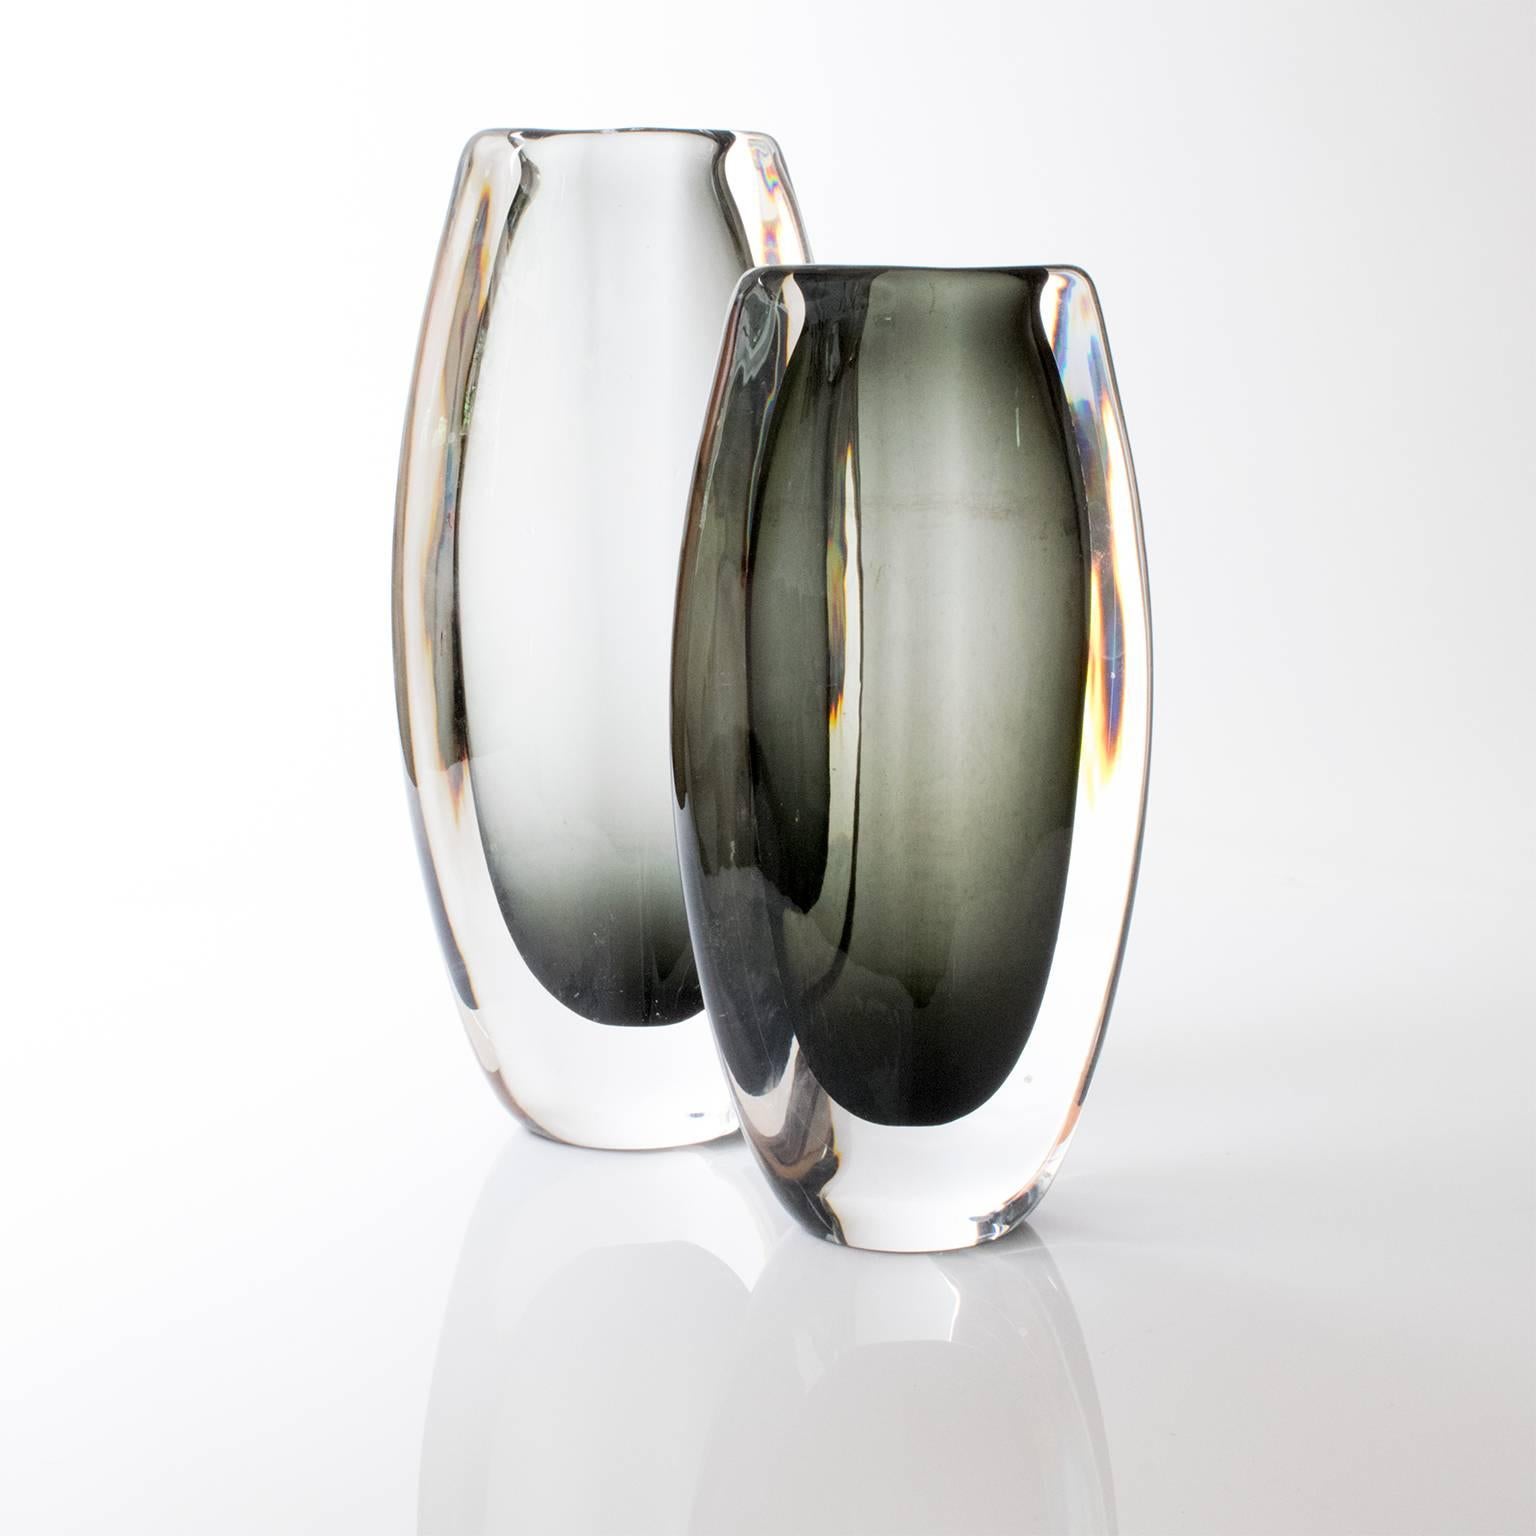 Two large hand-forged clear and neutral green mid-century modern glass vases. Designed by Nils Landberg for Orrefors, made in Sweden, circa 1960. The smaller vase a mineral trace marks.
 
Measures: Height 2